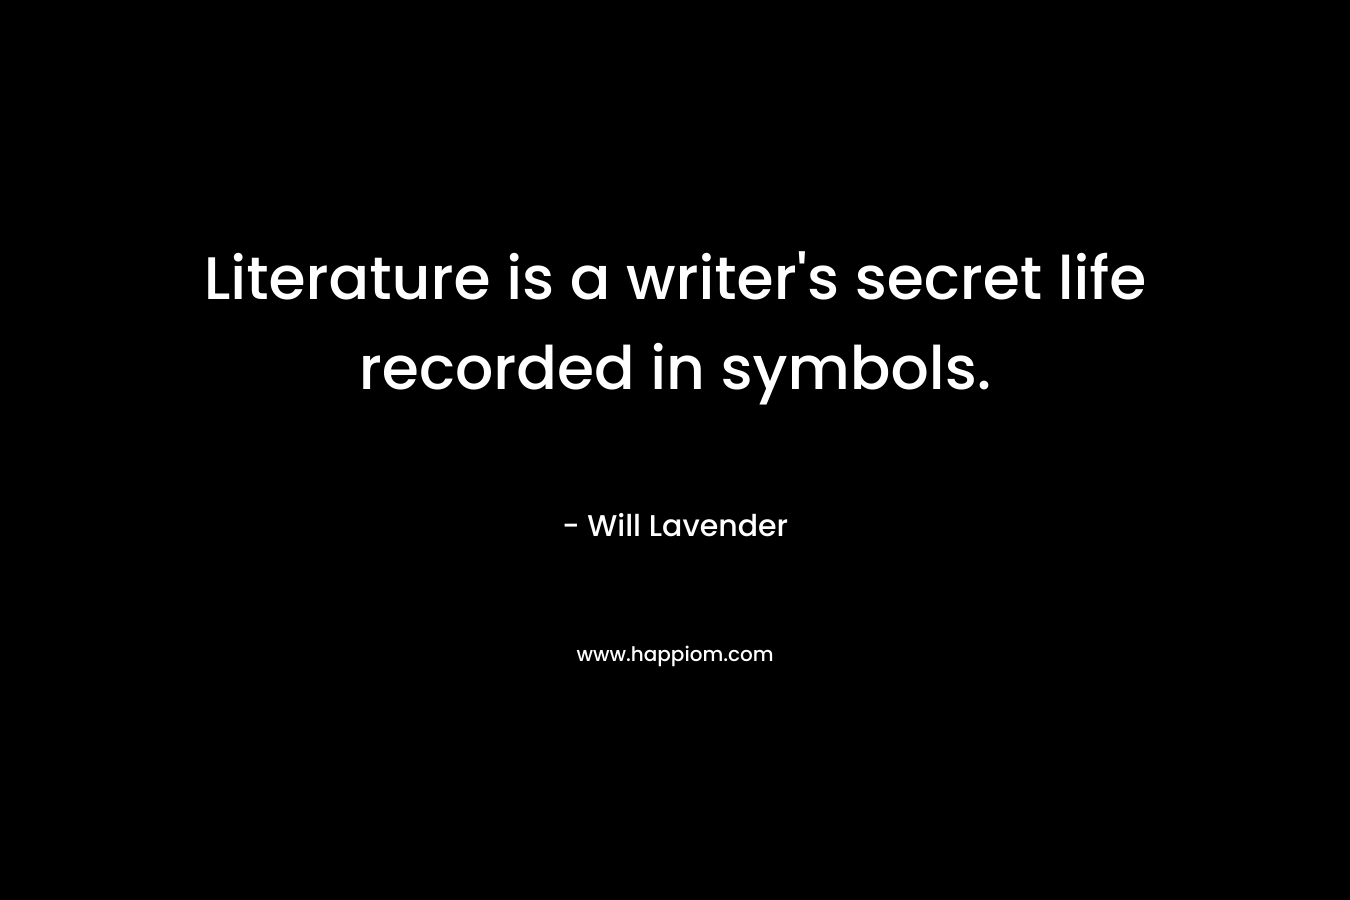 Literature is a writer’s secret life recorded in symbols. – Will Lavender